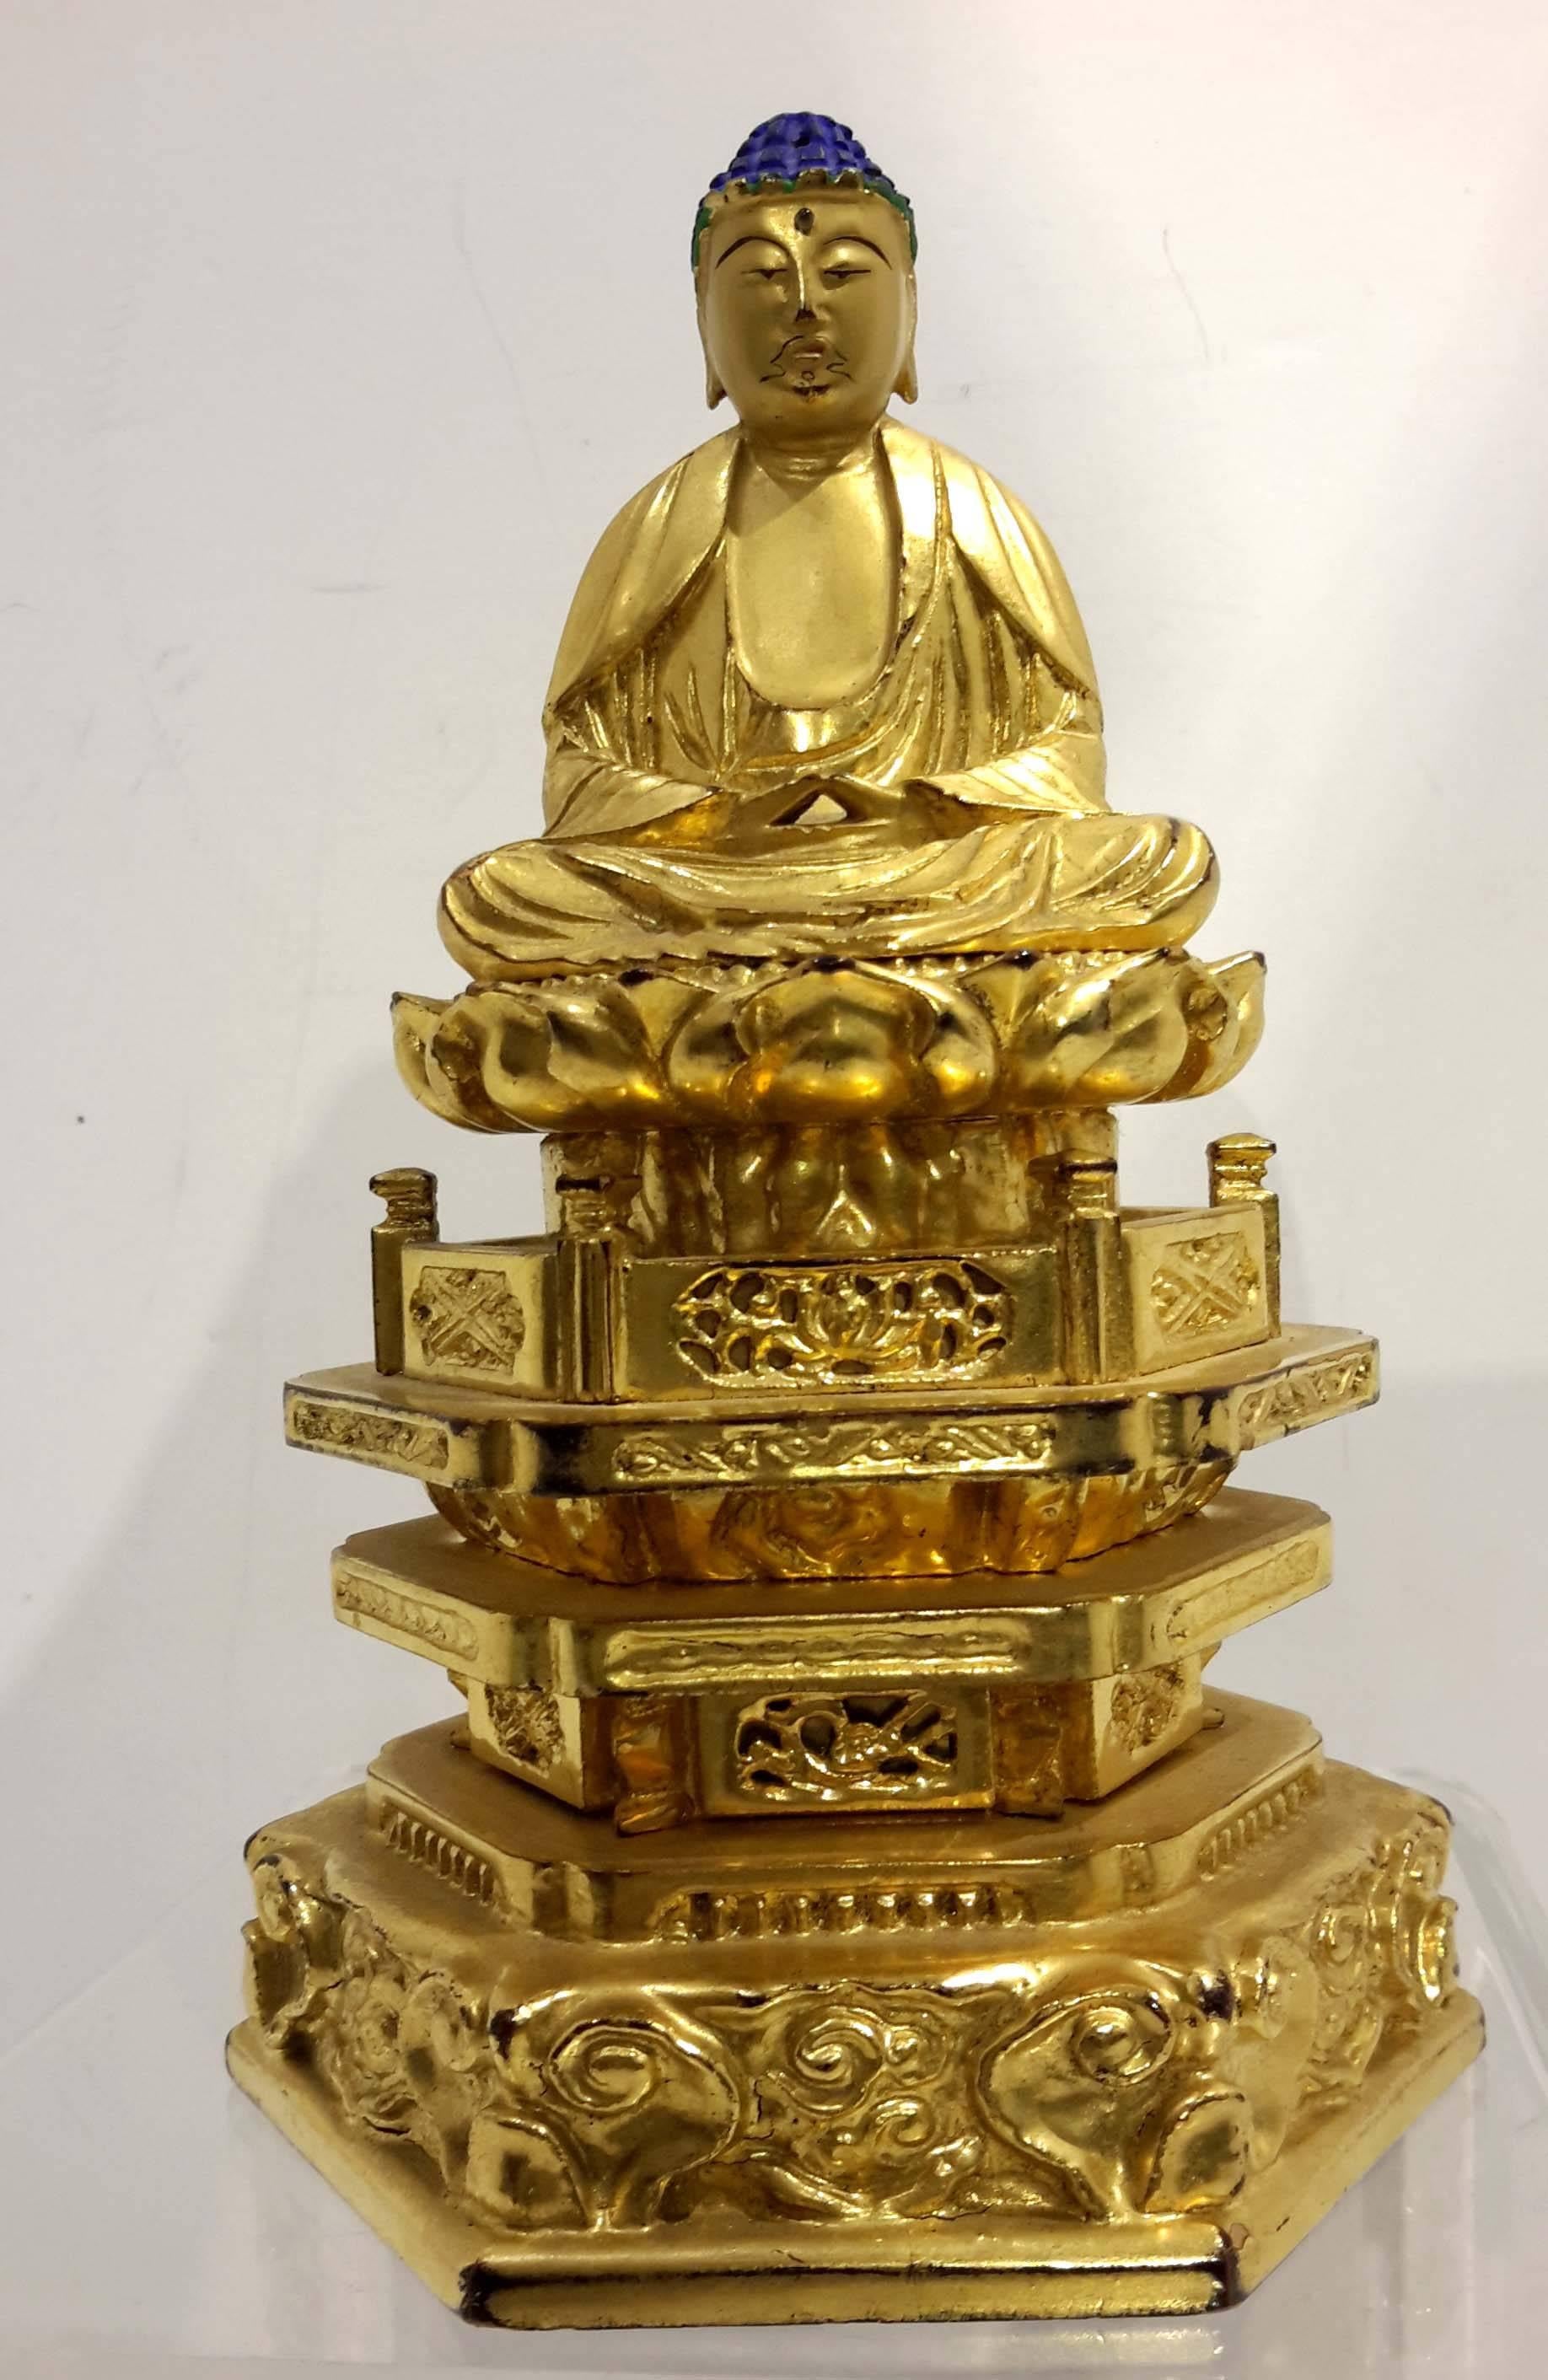 Beautifully gilded carved wood. This Buddha probably belonged in a traveling shrine at one time. Original lapis color paint on the top of the head.